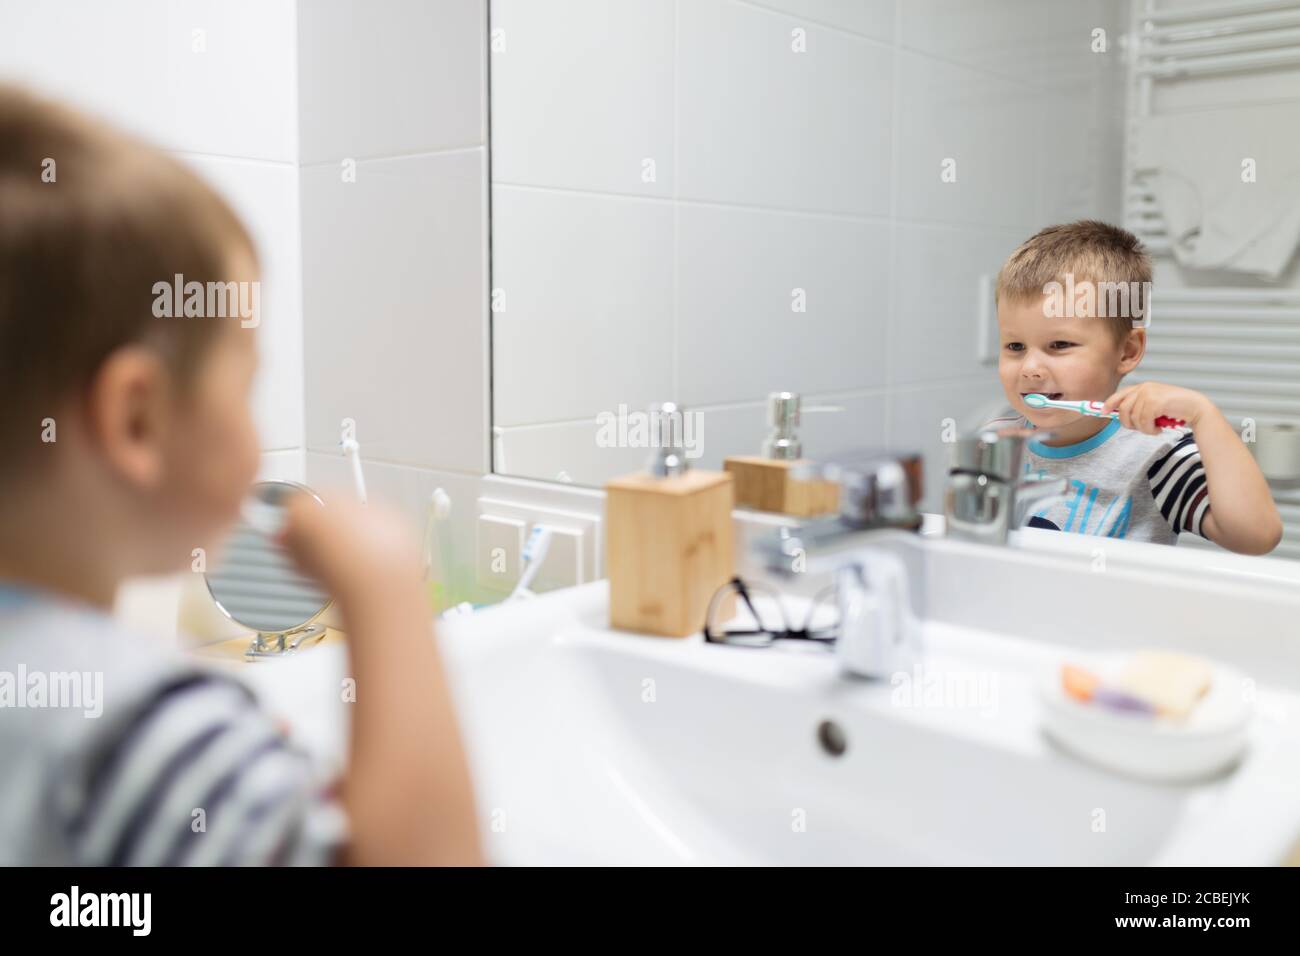 Adorable child brushing his teeth in the bathroom Stock Photo